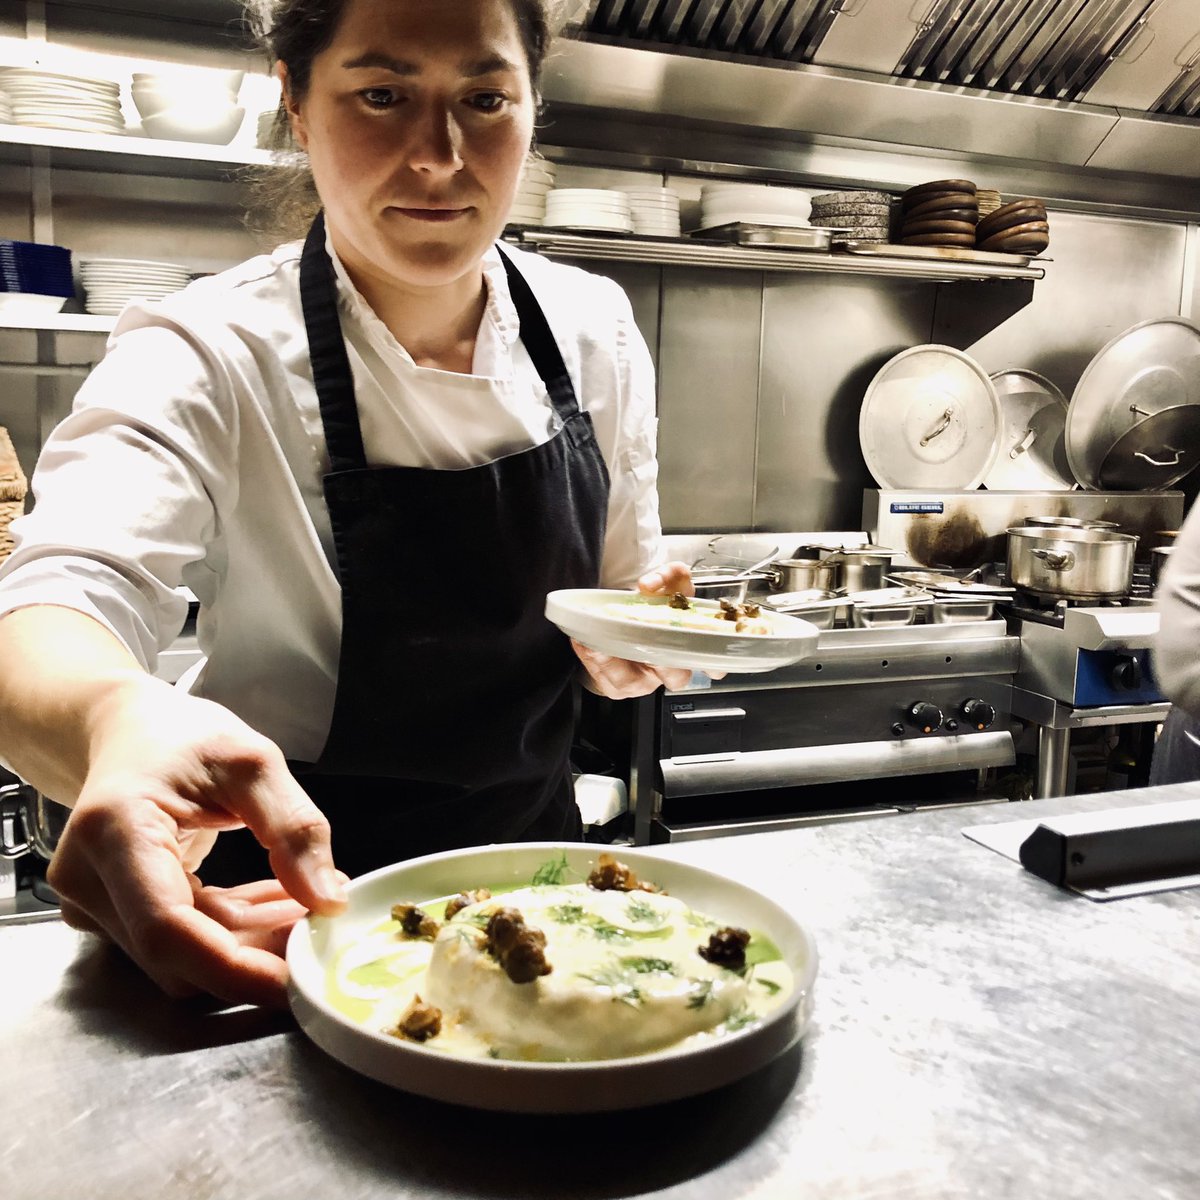 Our lovely dish of roasted celeriac steak, cream, dill & caper sauce heading out of the kitchen 😋
#loculto #se4 #supportlocal #indiebiz #christmas